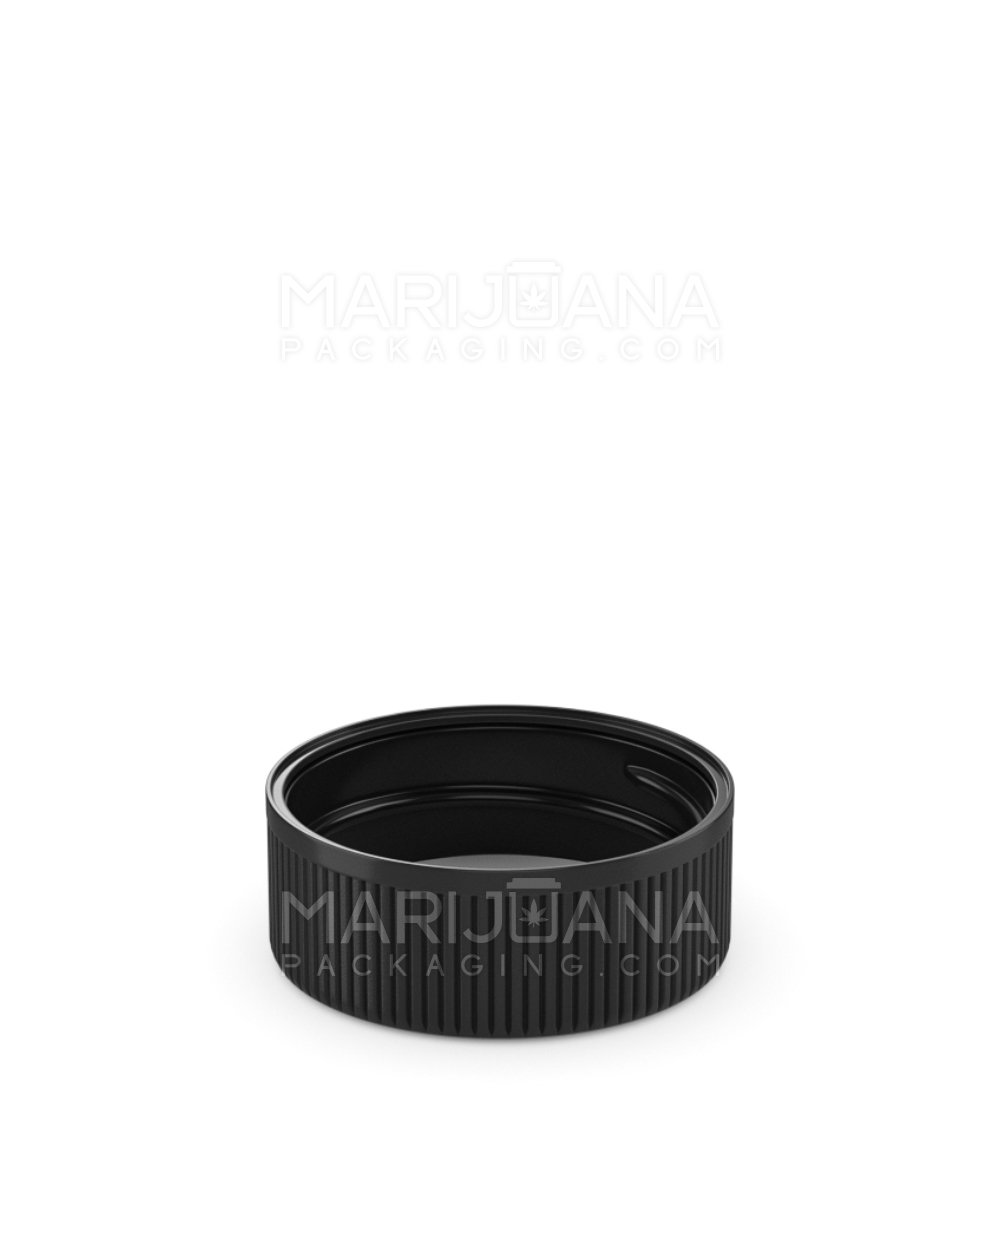 Child Resistant | Ribbed Push Down and Turn Plastic Caps w/ Text & Foam Liner | 38mm - Semi Gloss Black - 84 Count - 4